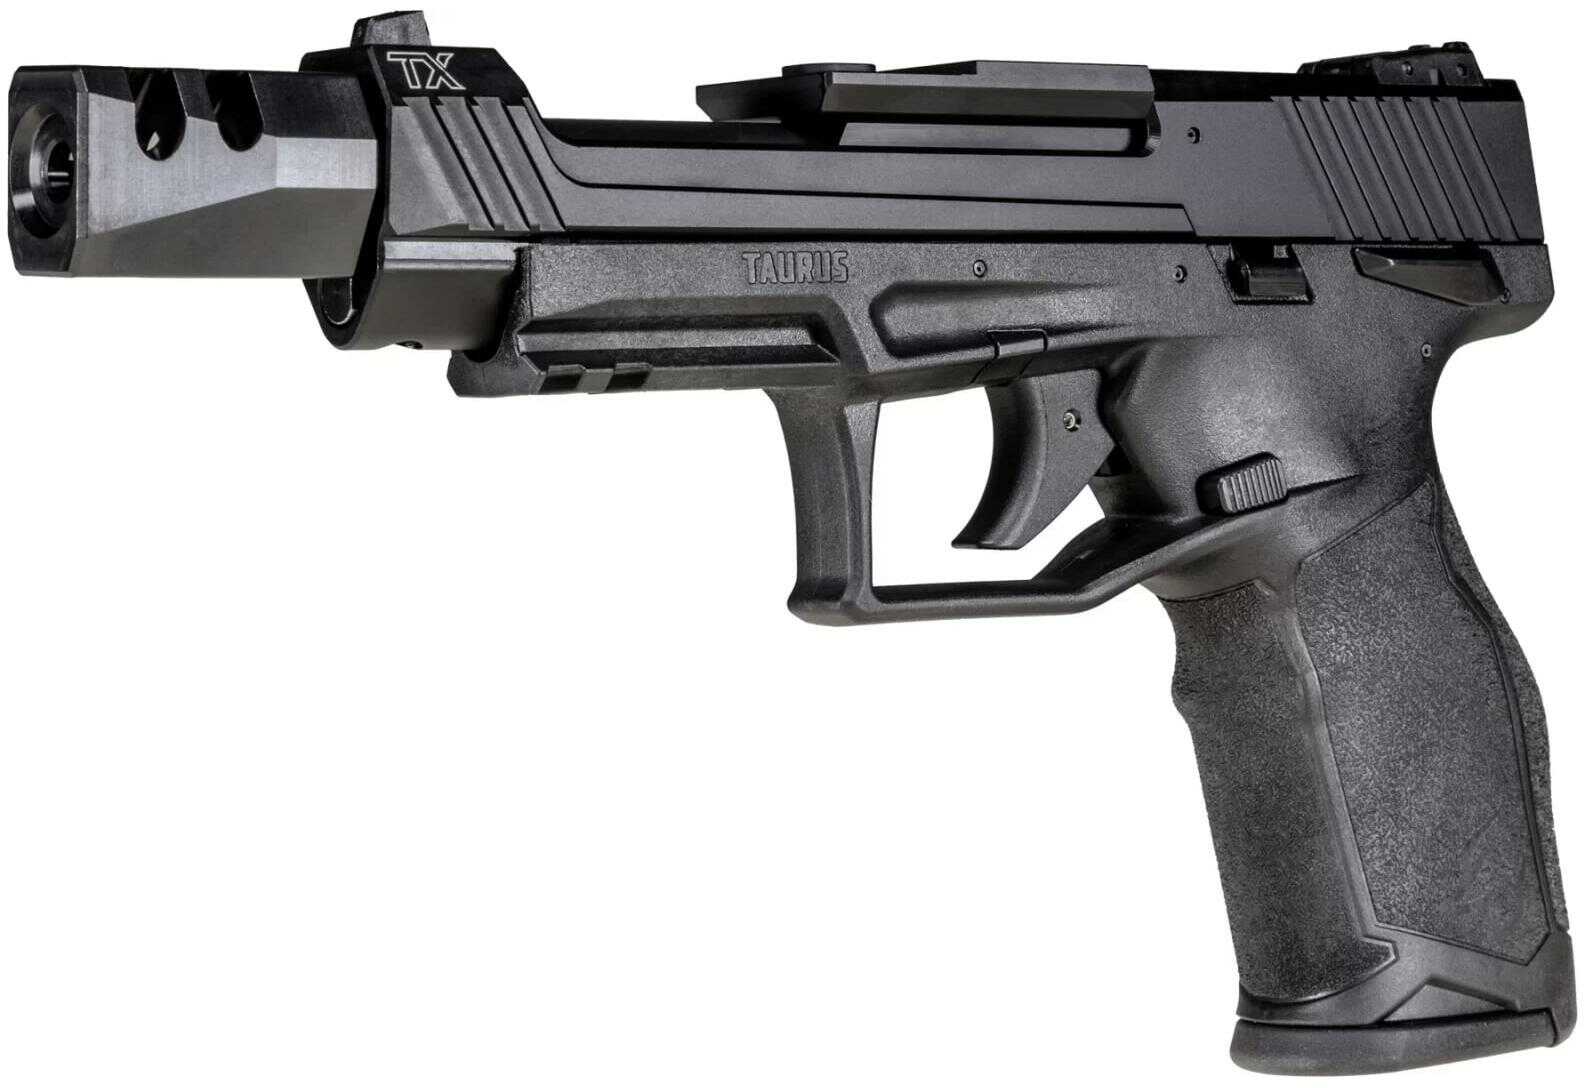 Taurus TX22 Competition Striker Fired Semi-Automatic Rimfire Pistol .22 Long Rifle 5.25" Threaded Barrel (3)-10Rd Magazines Fixed Front & Adjustable Rear Sights Black Polymer Finish